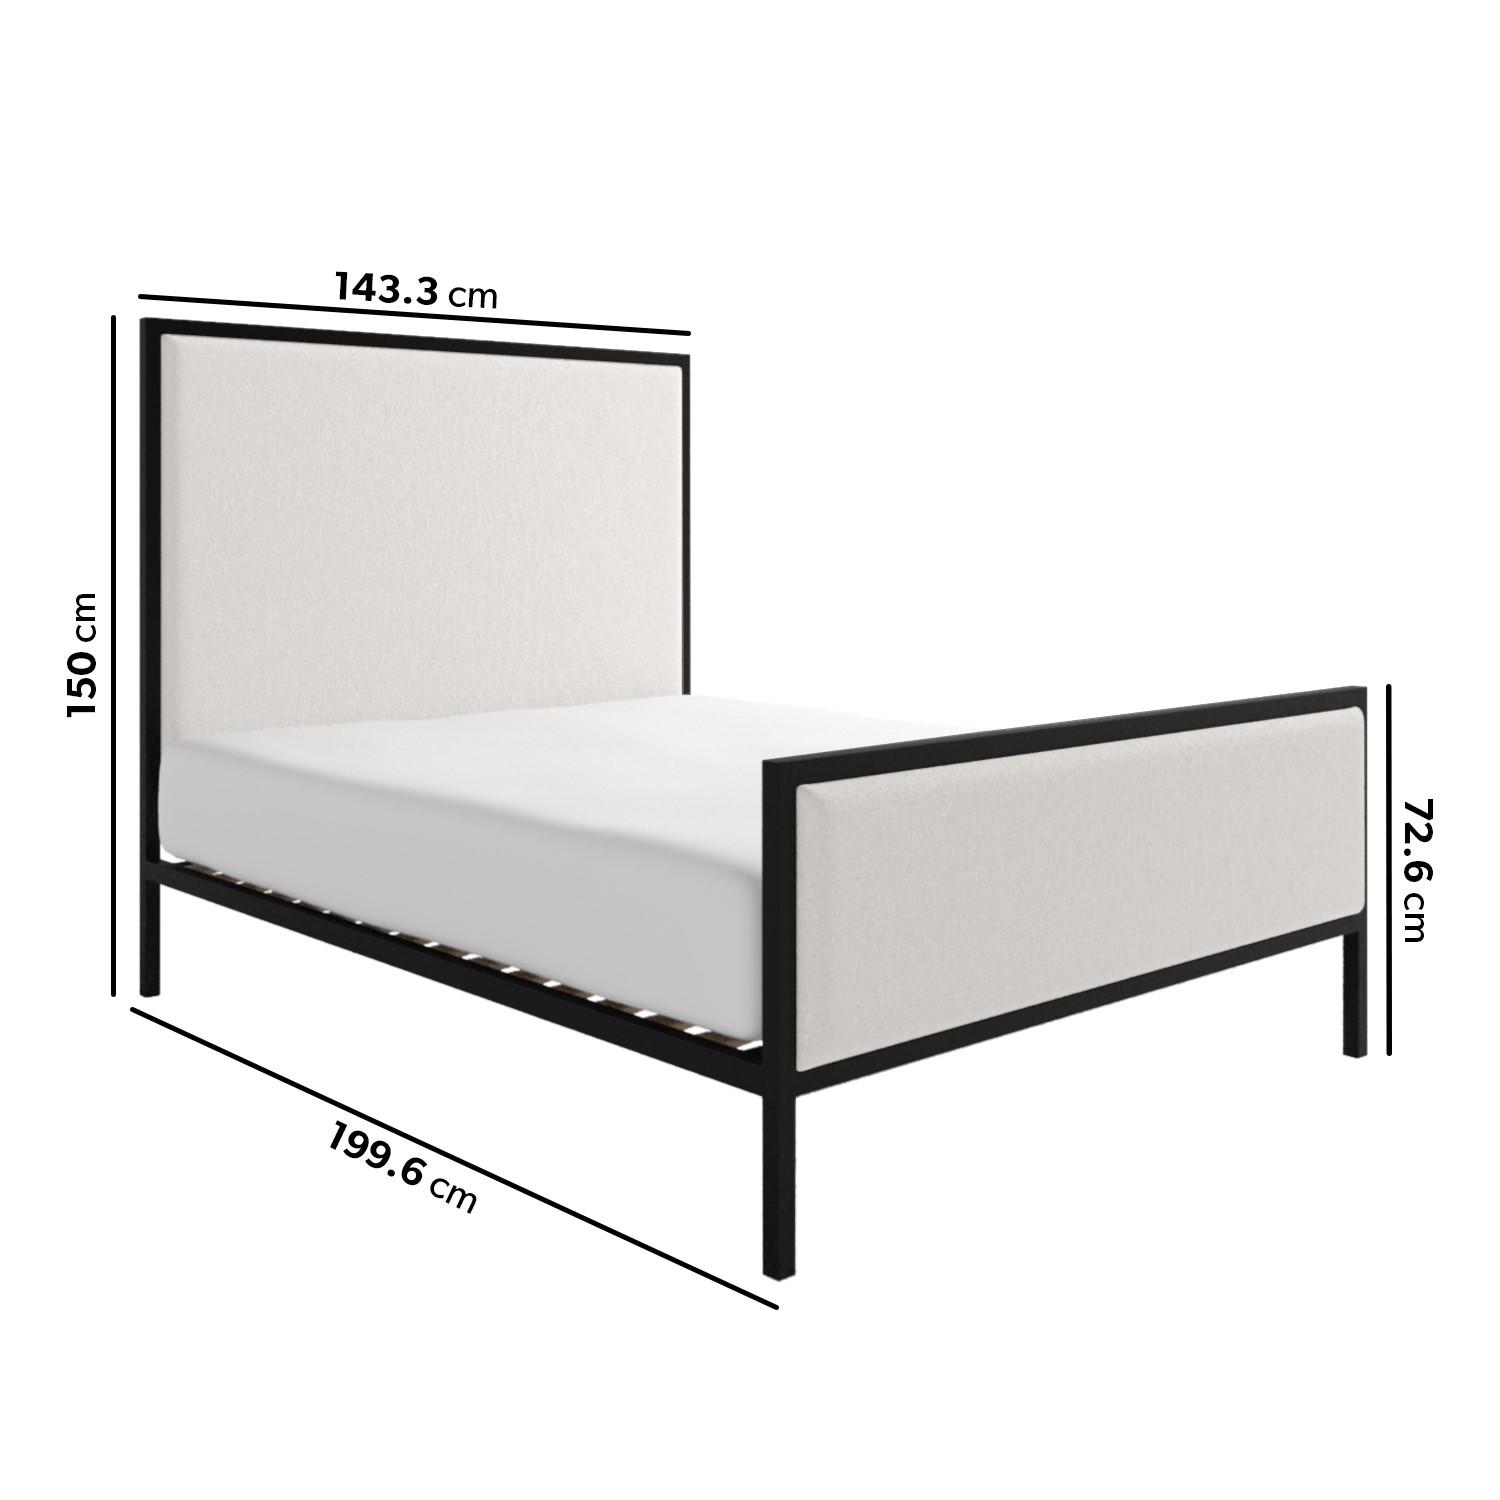 Read more about Beige upholstered double bed with black metal frame alexandra